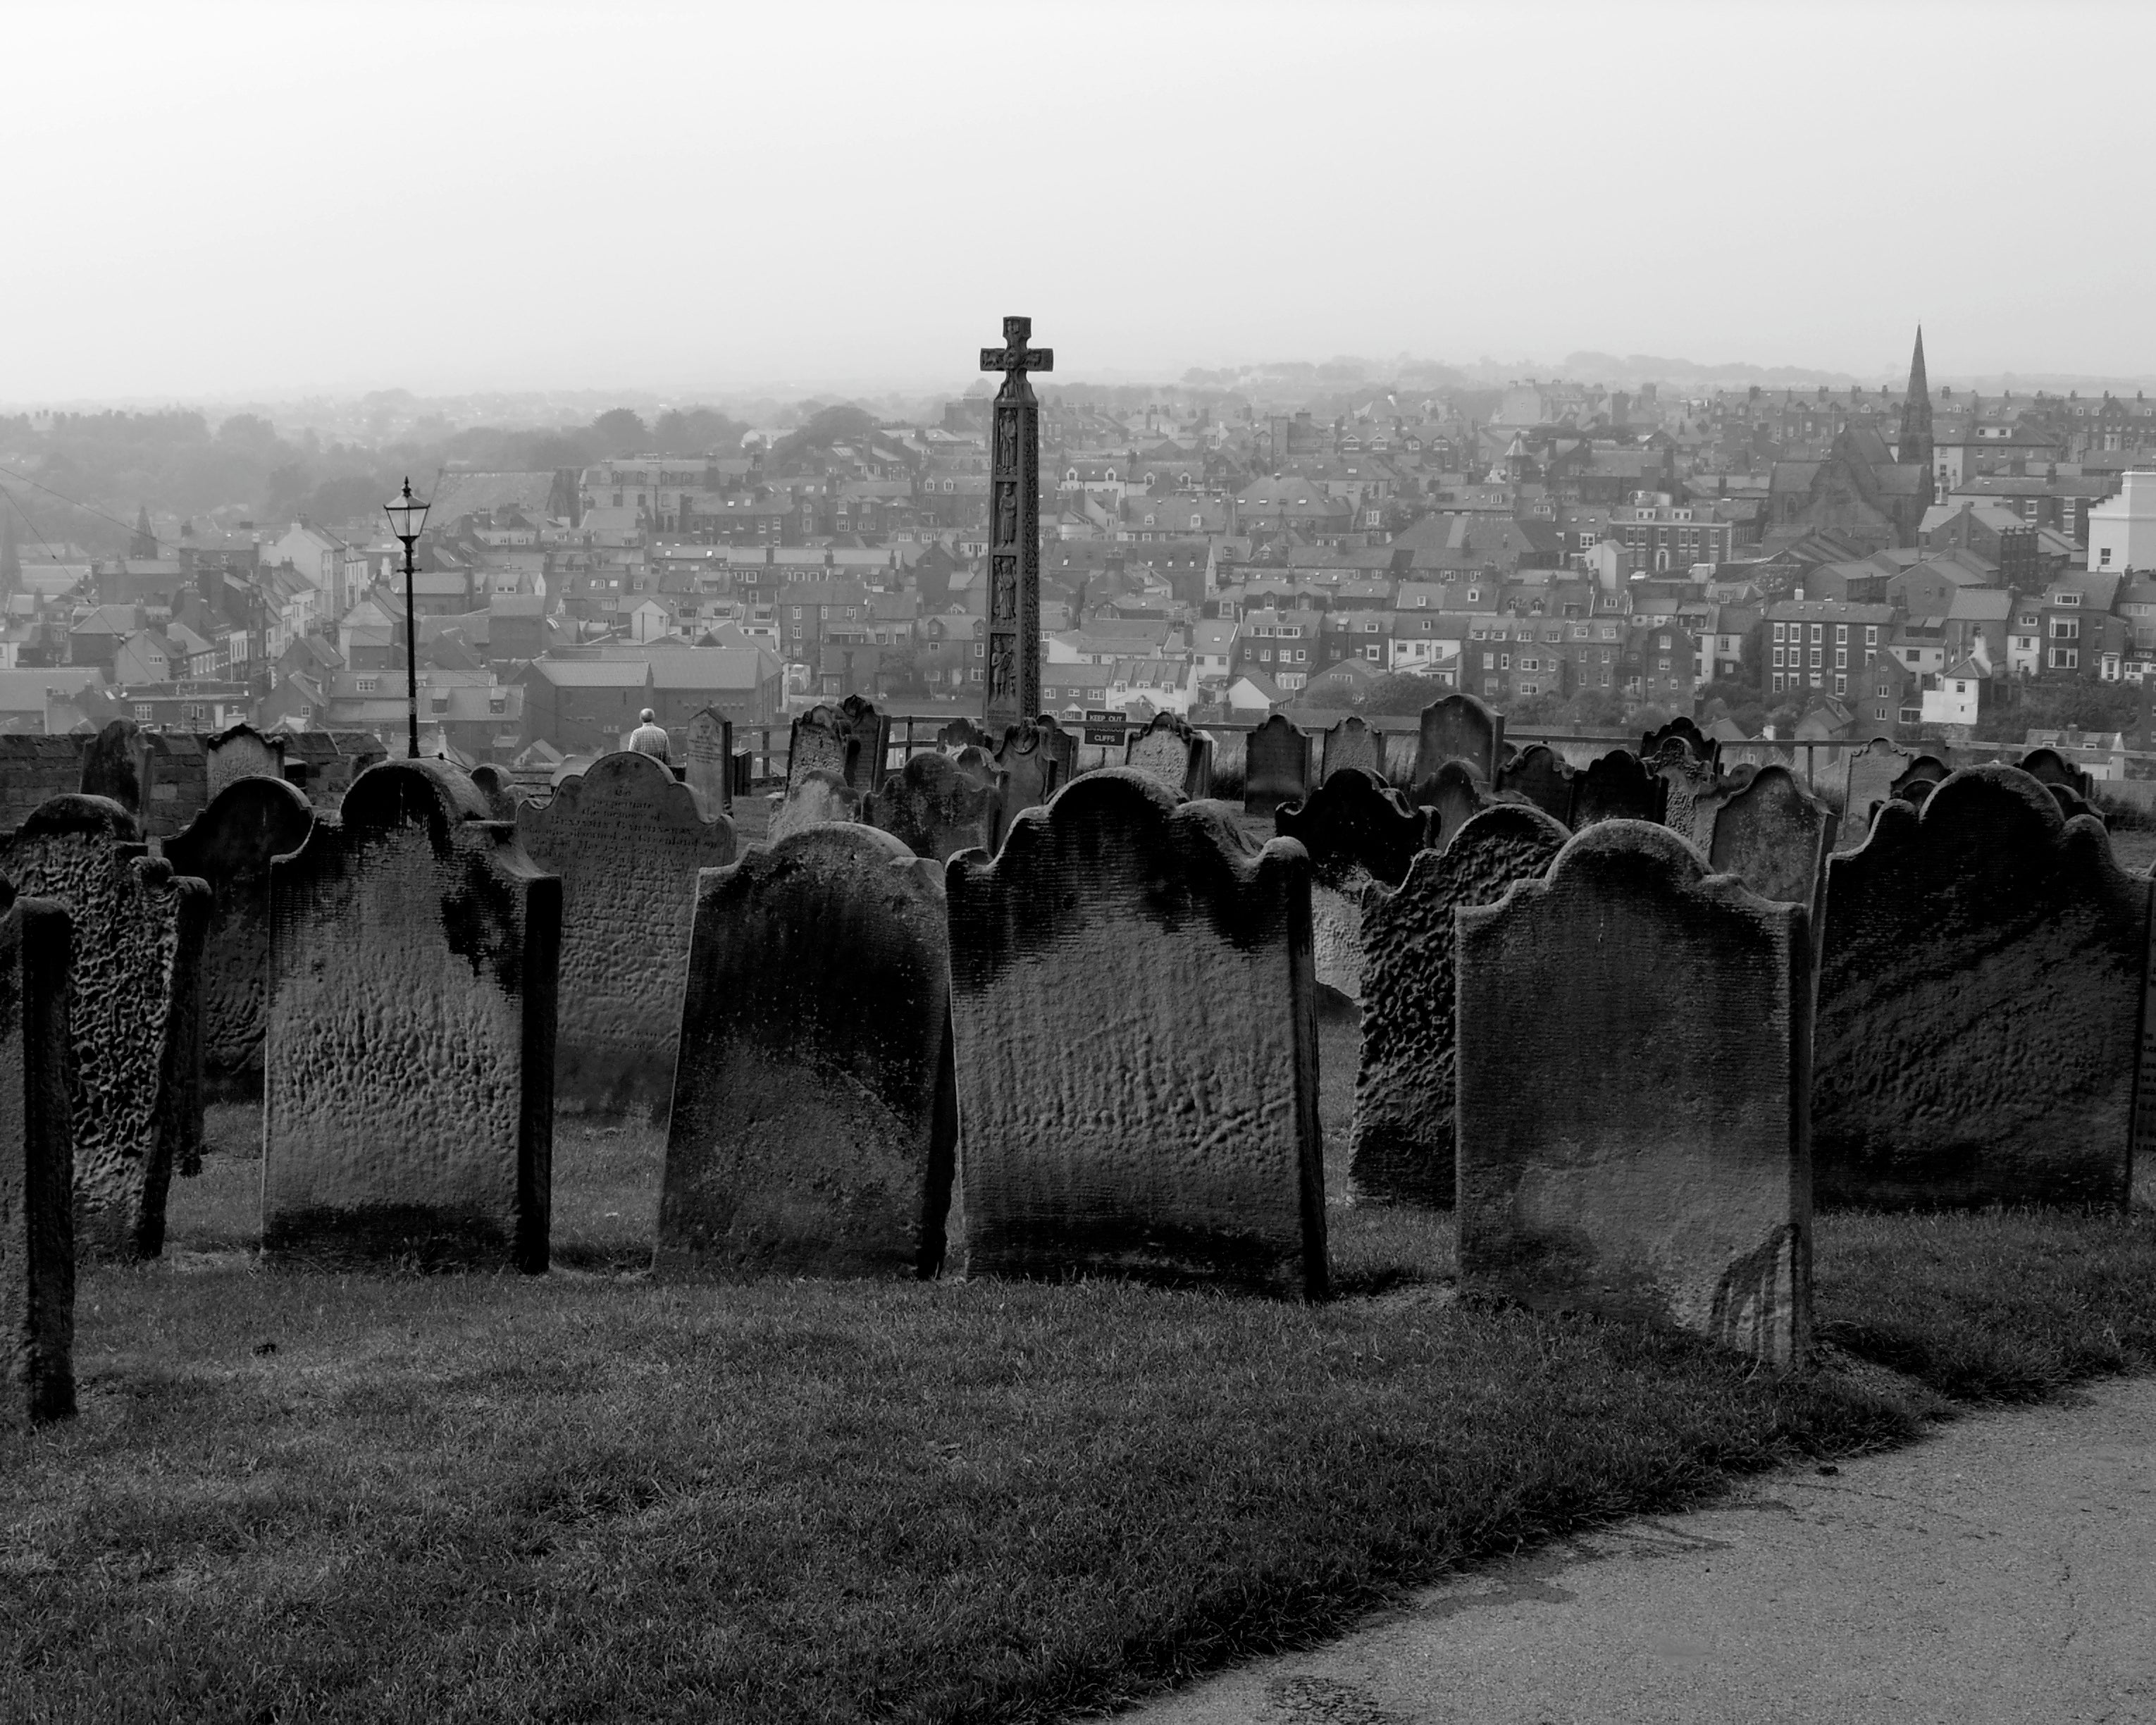 St Mary's church graveyard in Whitby was a great inspiration for Stoker